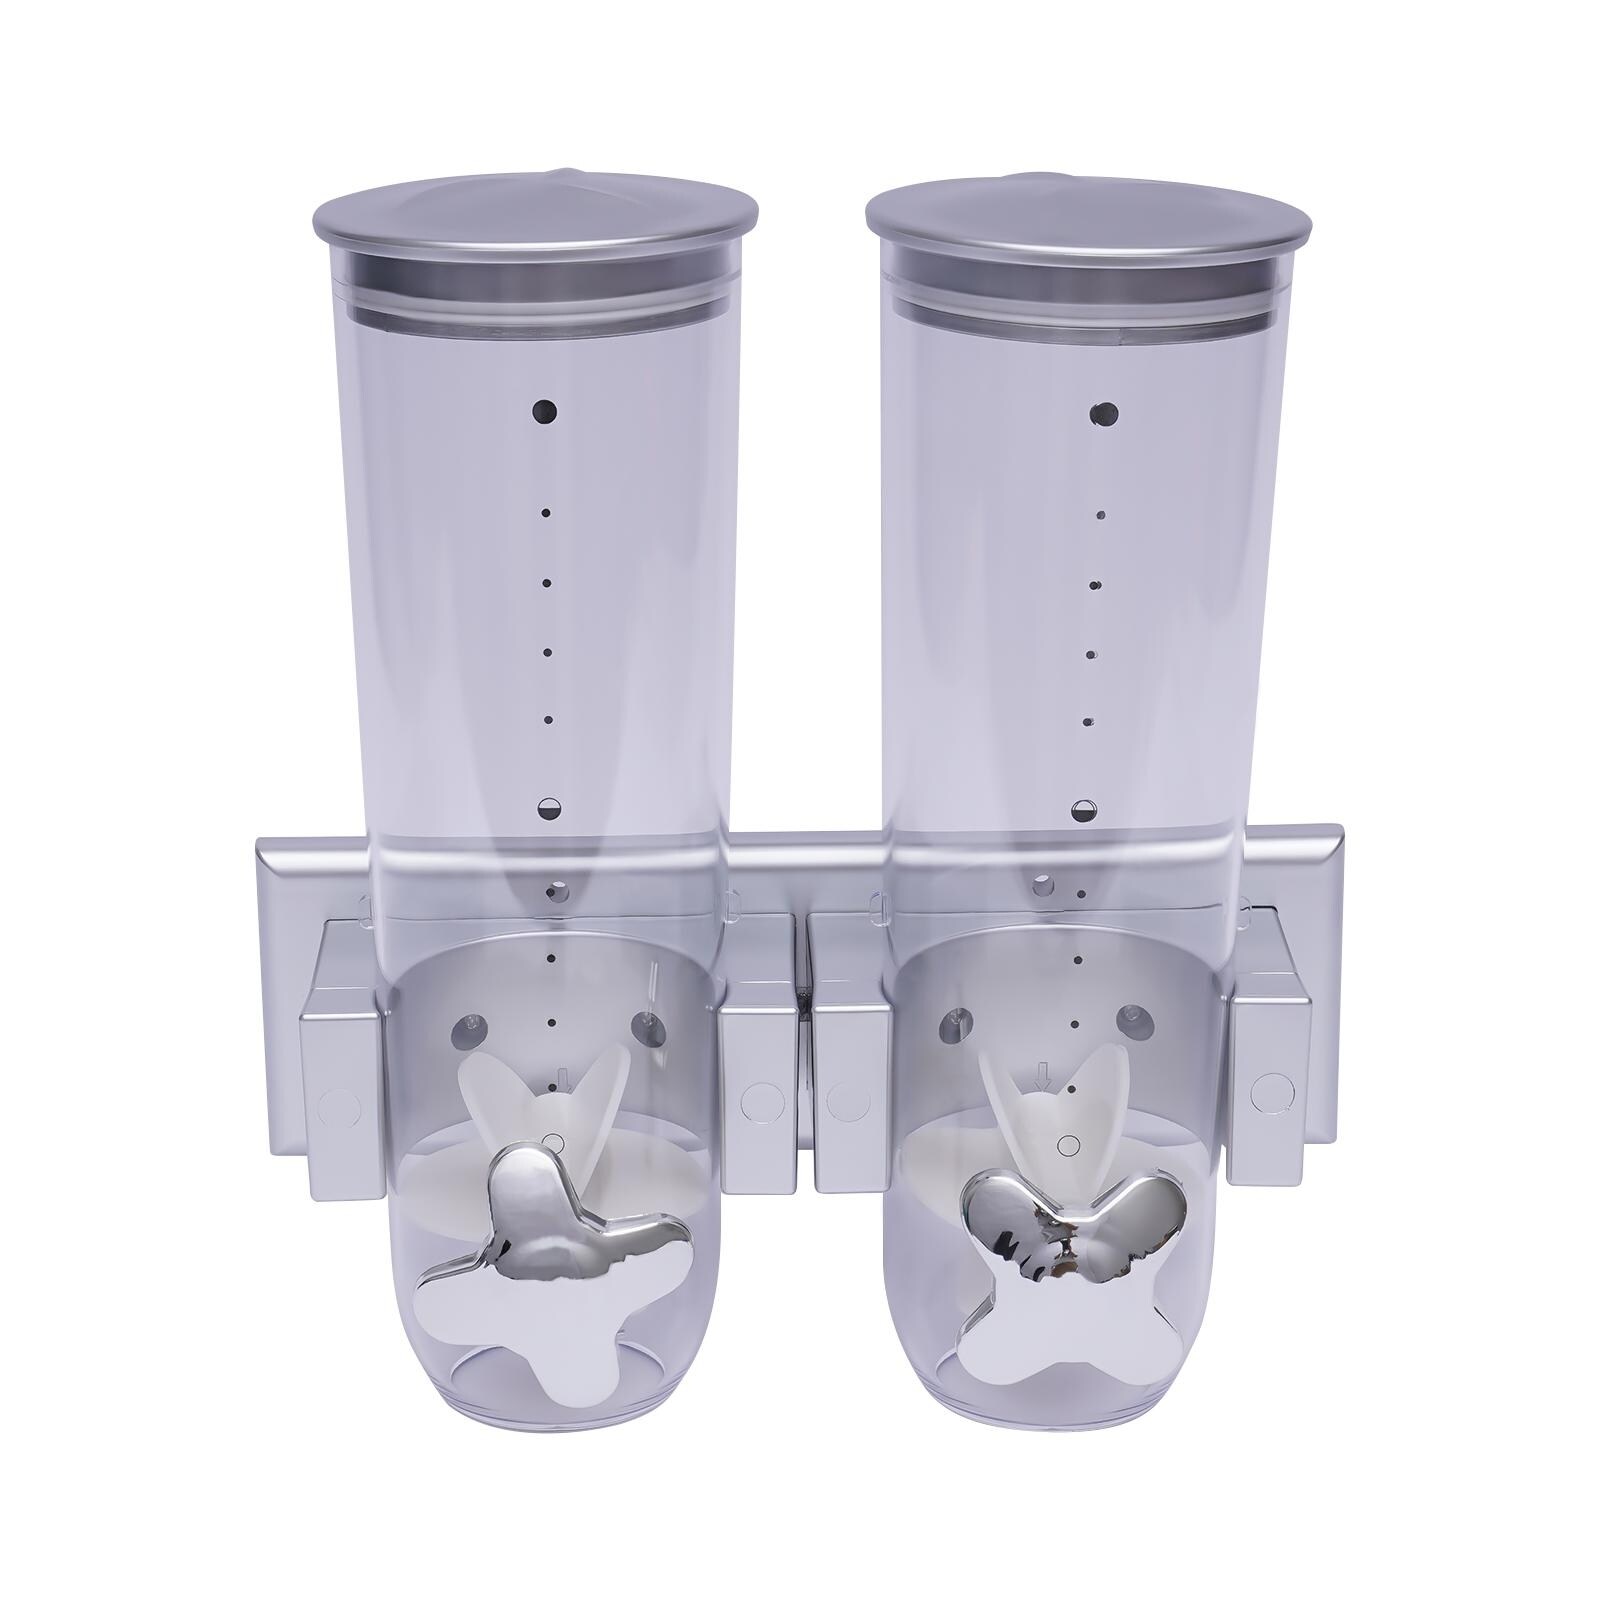 https://ak1.ostkcdn.com/images/products/is/images/direct/b8766ad096f6c5d891e0ec2ff3519084af6a601f/Wall-mounted-2-Piece-Food-Cereal-Dispenser-3L-Kitchen-Organizer.jpg